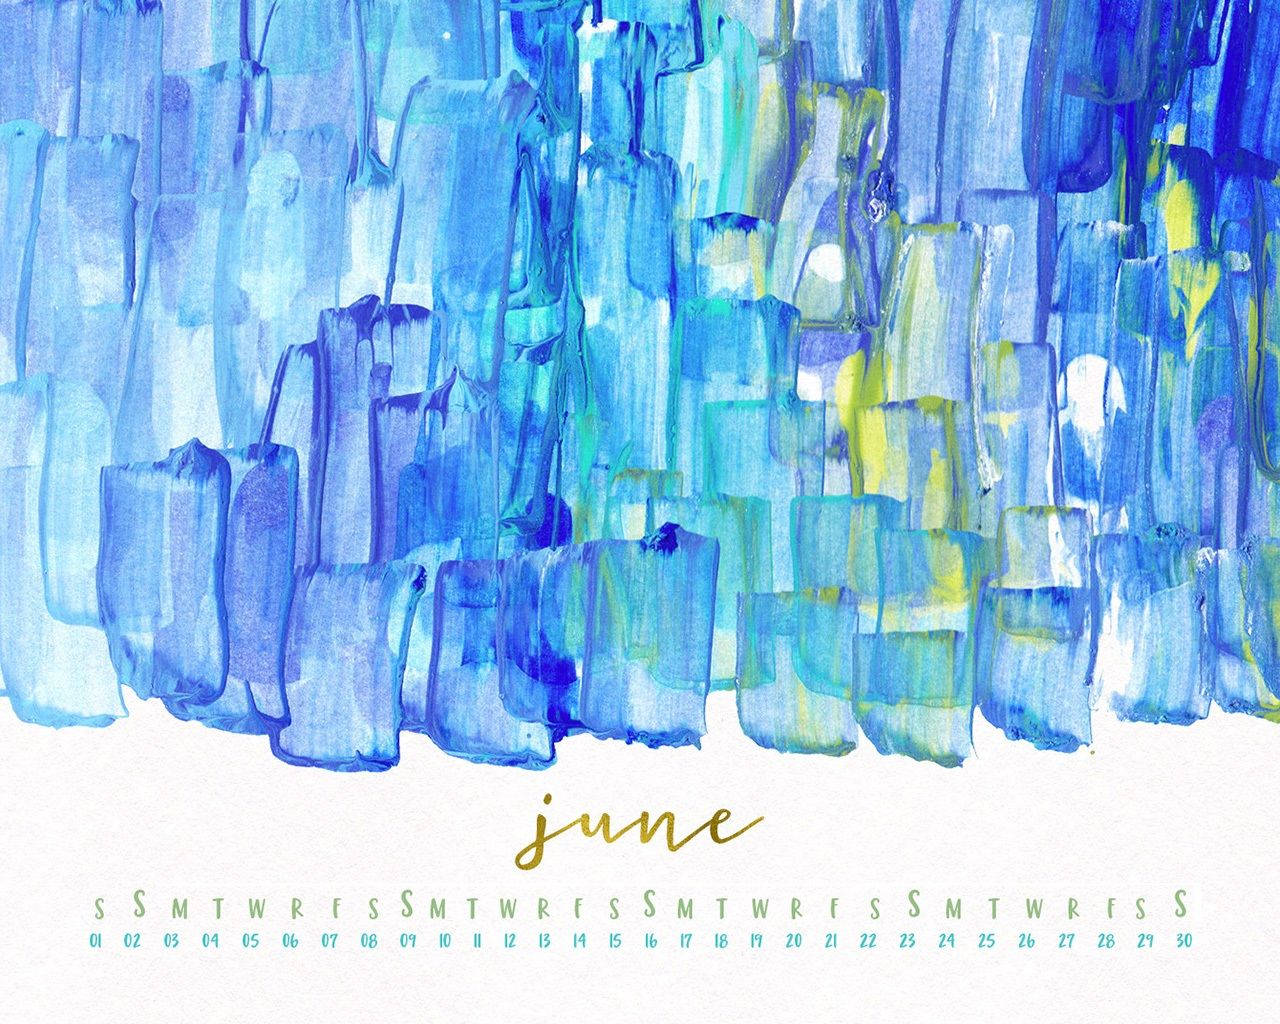 June 2018 - A Blue Painting of Reflection and Introspection Wallpaper